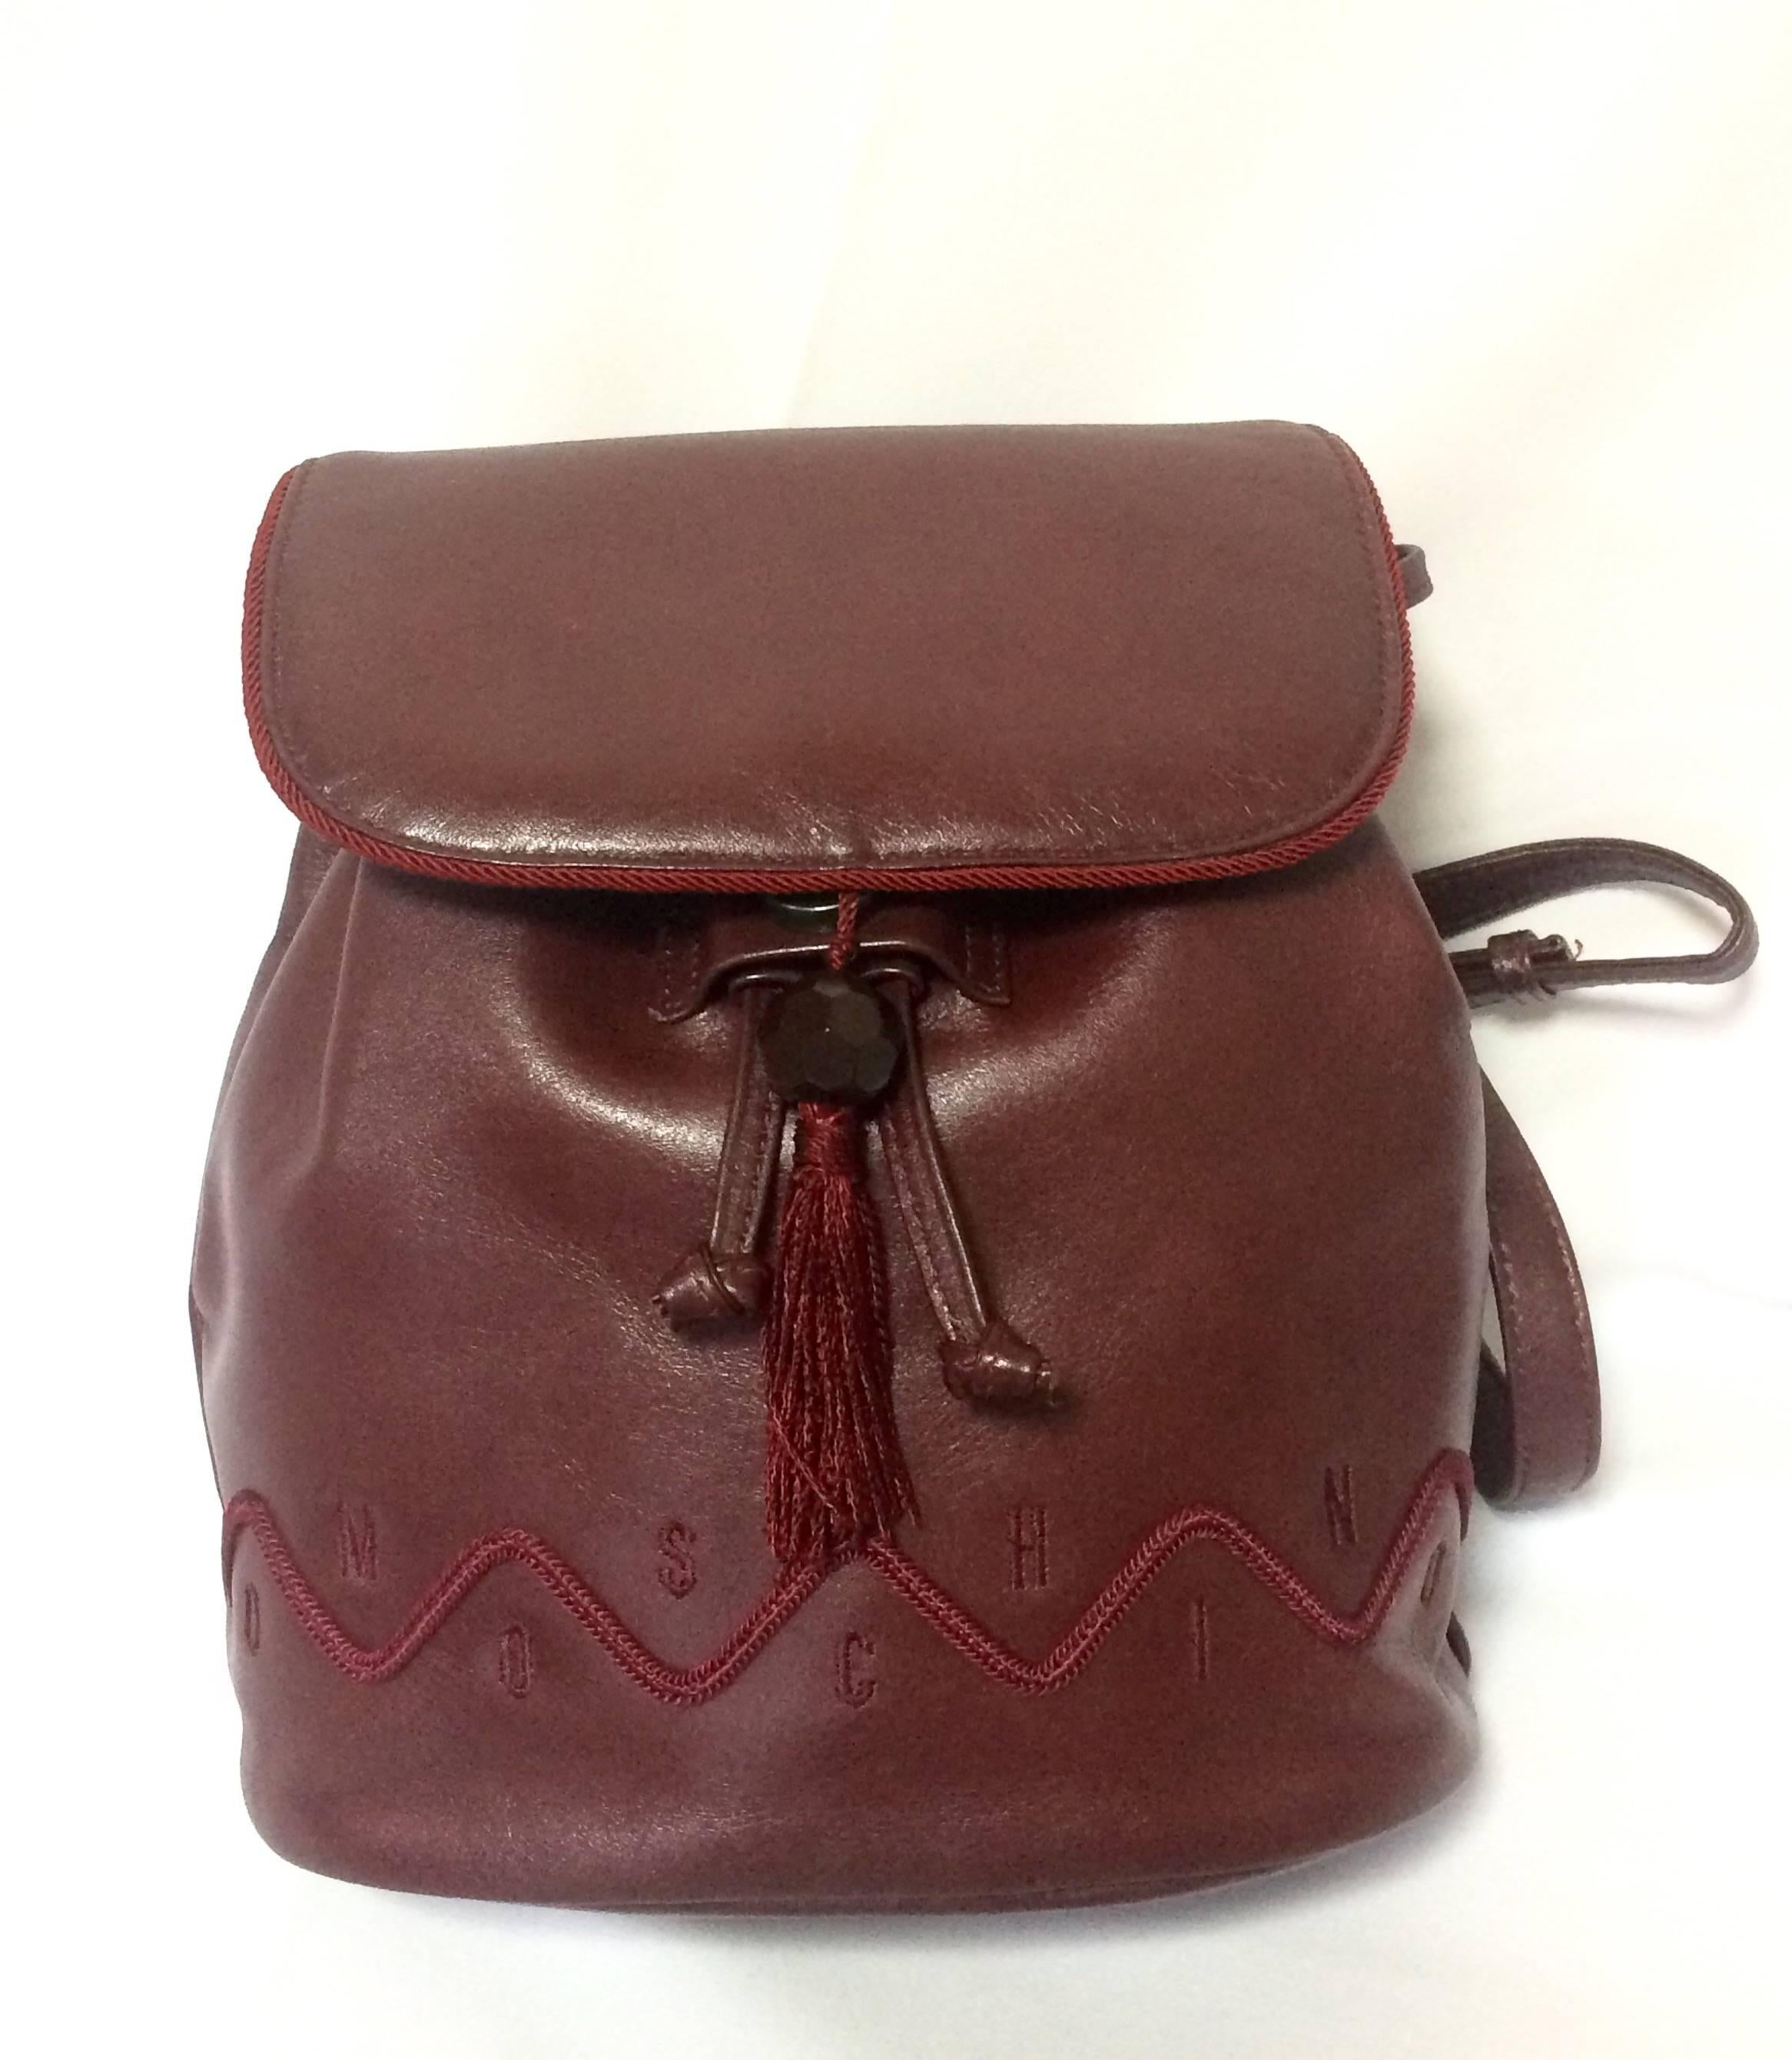 1990s. Vintage MOSCHINO genuine dark wine nappa leather backpack with tassel and logo embroidery motifs. Small to Medium size for daily use.

Introducing another unique and rare vintage piece from MOSCHINO back in the 90's.
Small to medium size